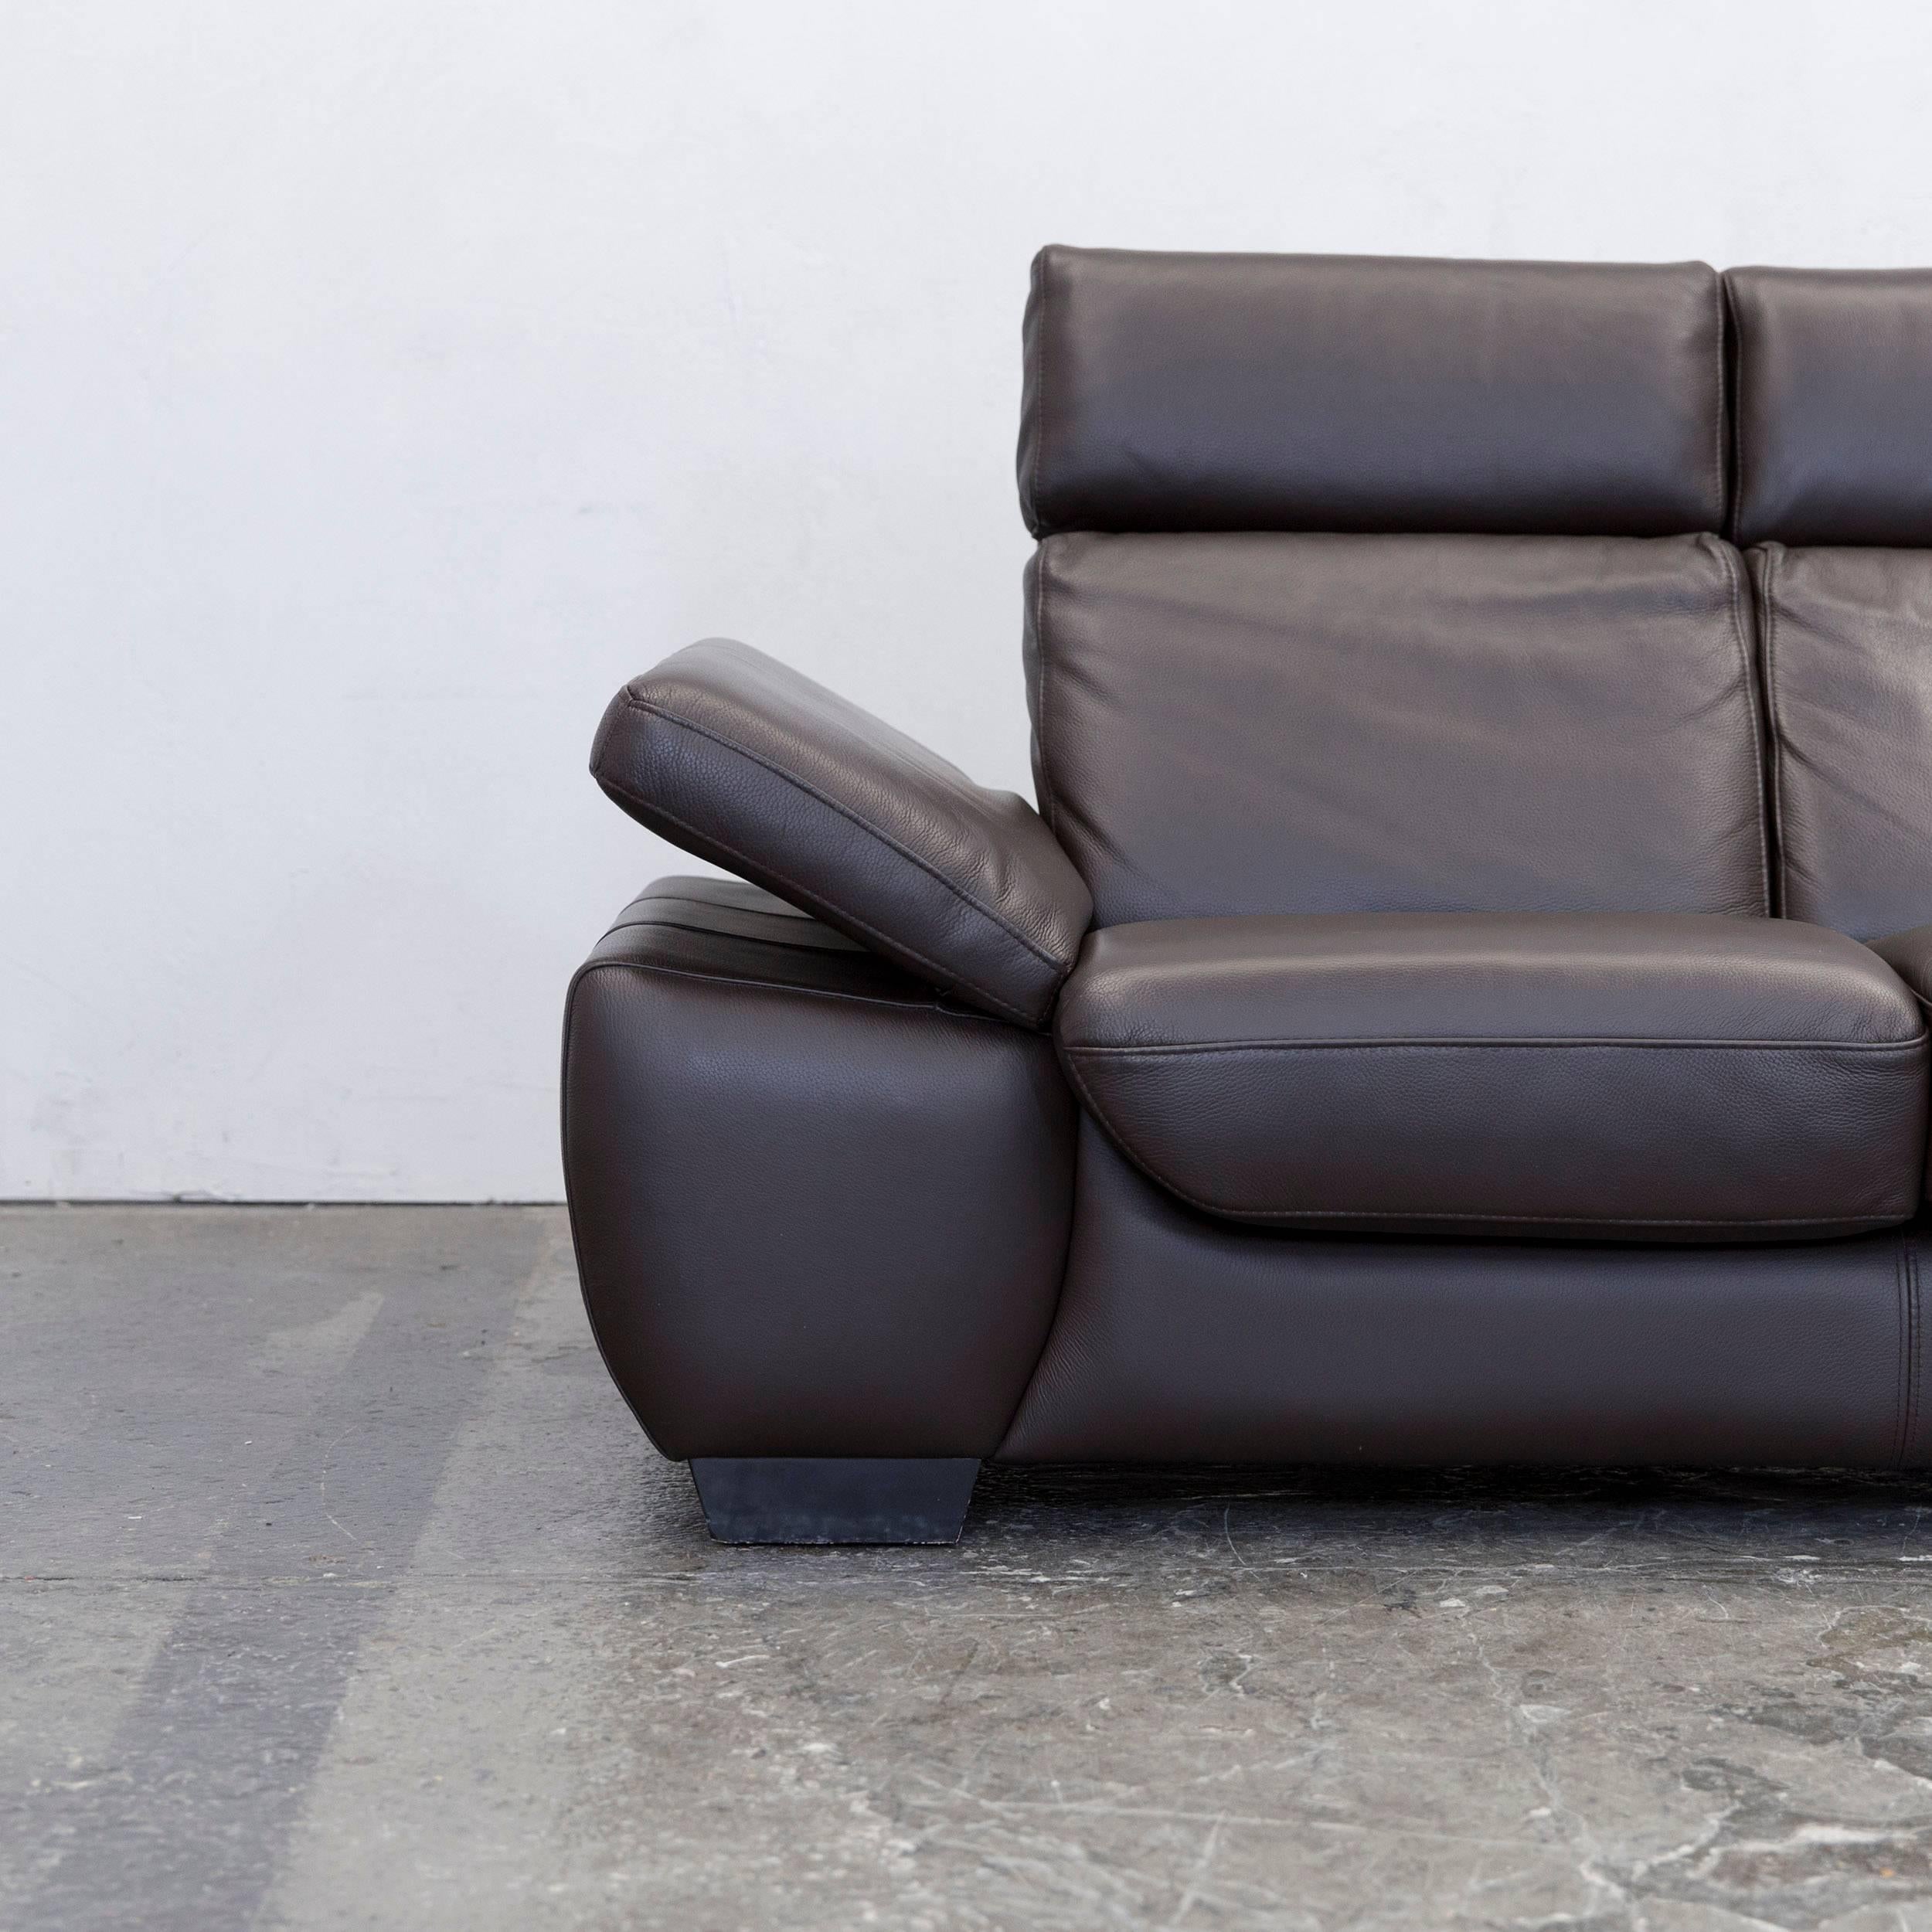 Modern three-seat in authentic brown leather with recline function.